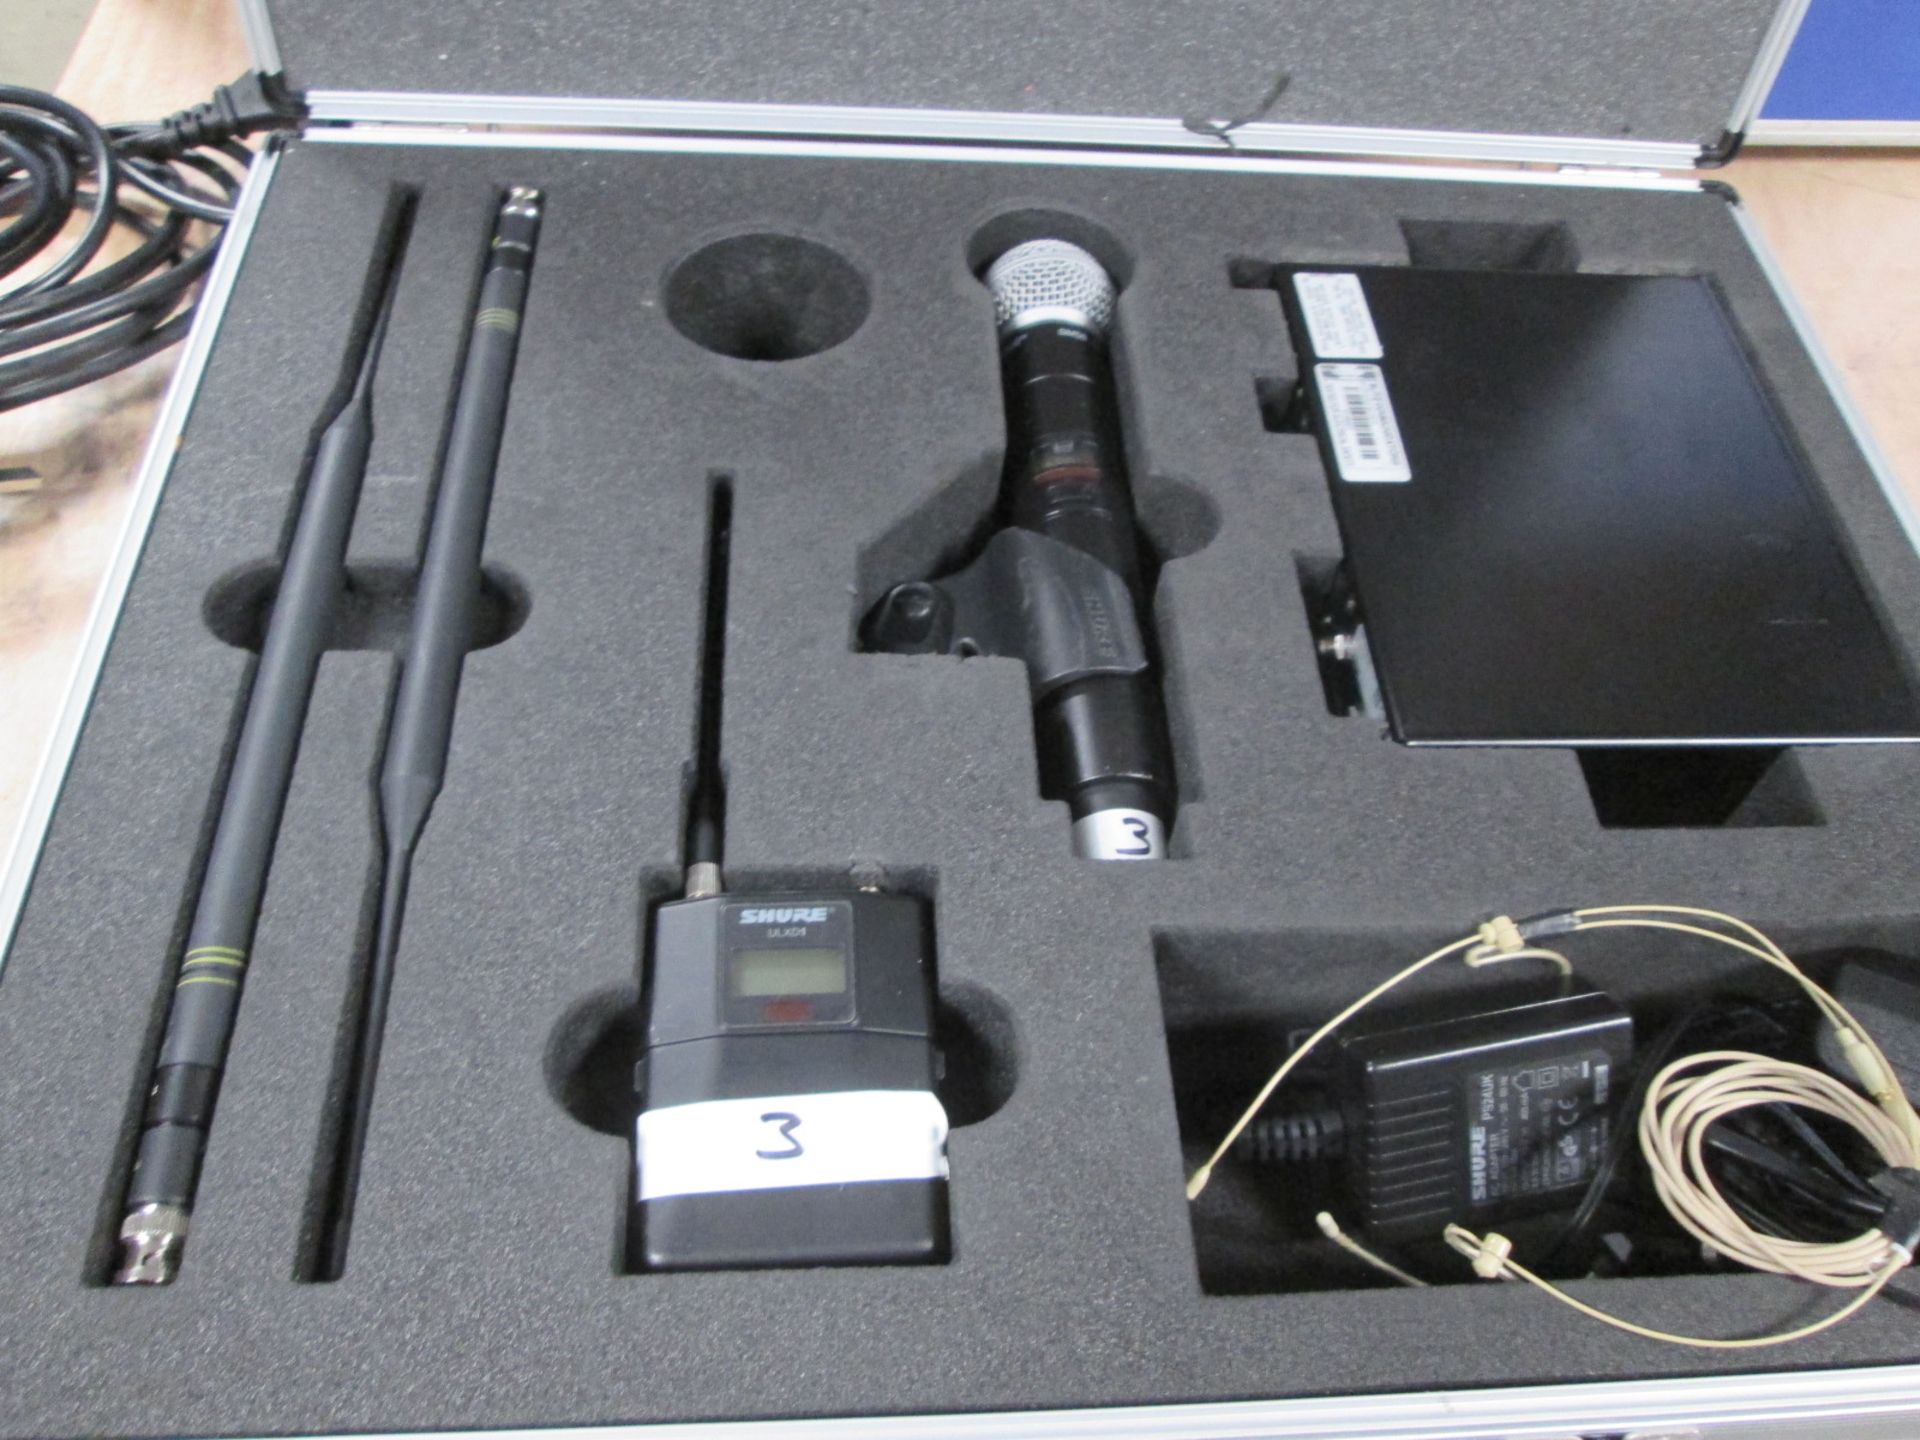 Shure QLXD4 Single Channel Radio Mic Kit 606-670 MHz (Qty 5) Kit to include K51 receiver, QLXD2 - Image 7 of 8